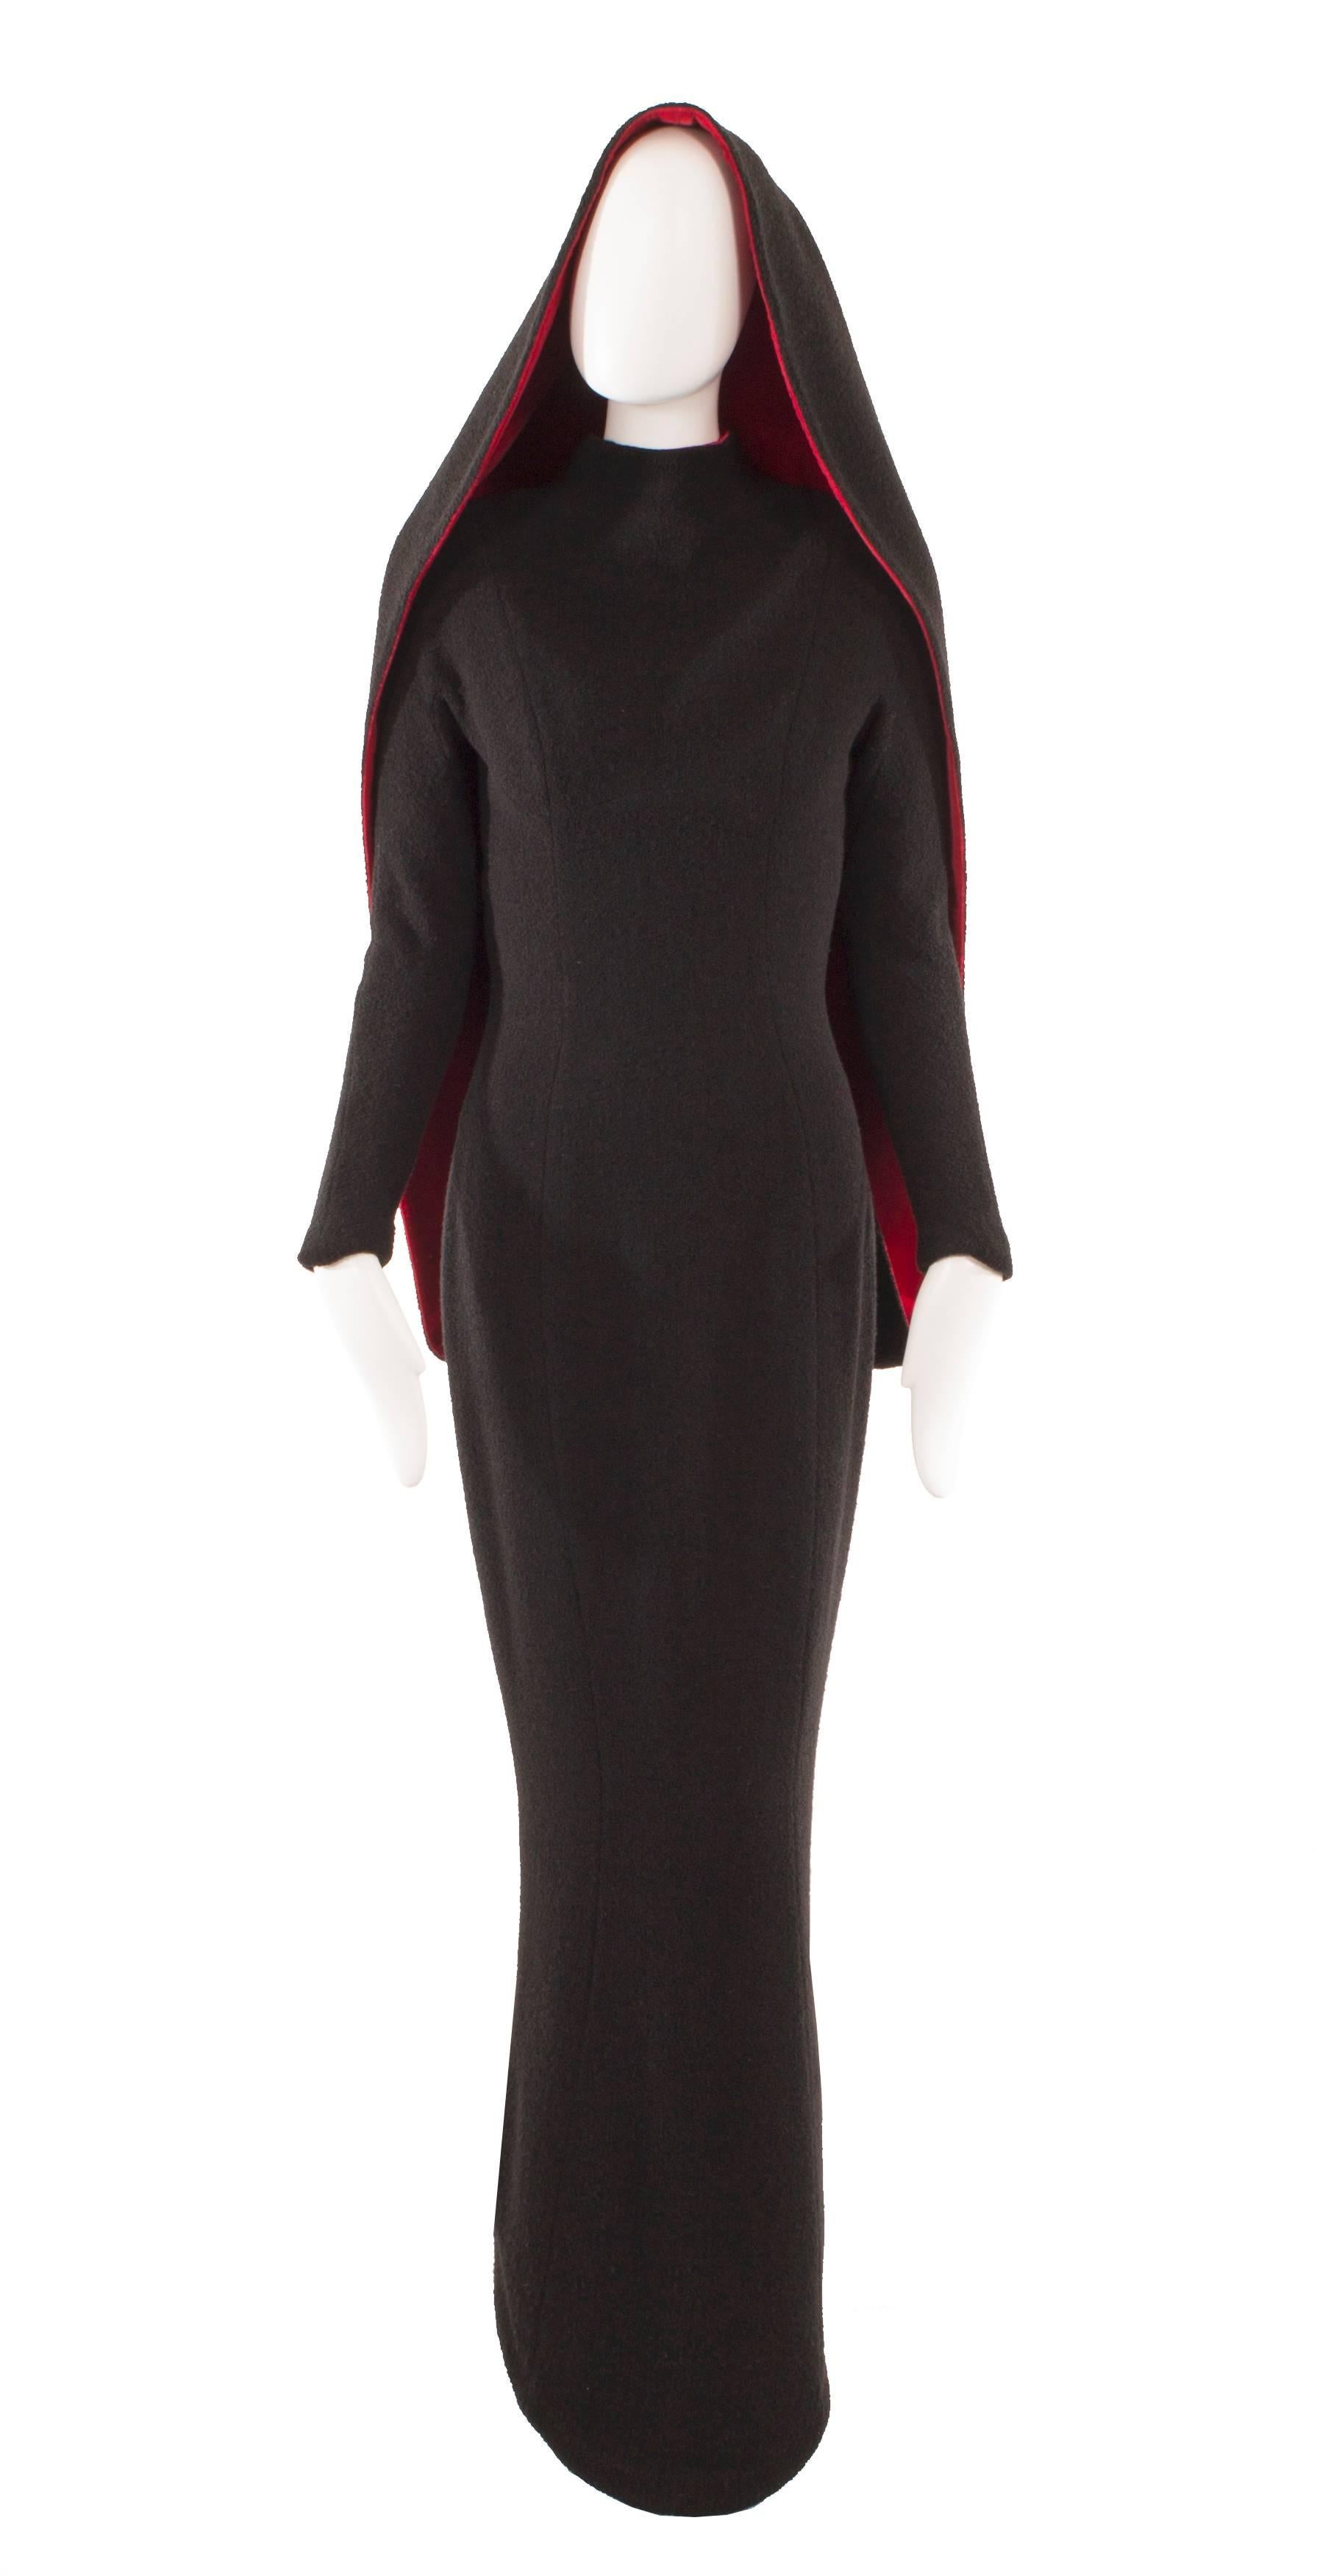 A show-stopping choice for a red carpet event, this Thierry Mugler evening gown will be sure to make a statement! Constructed in black boucle wool, which skims the body, creating a flattering hourglass silhouette. Featuring a high neckline to the